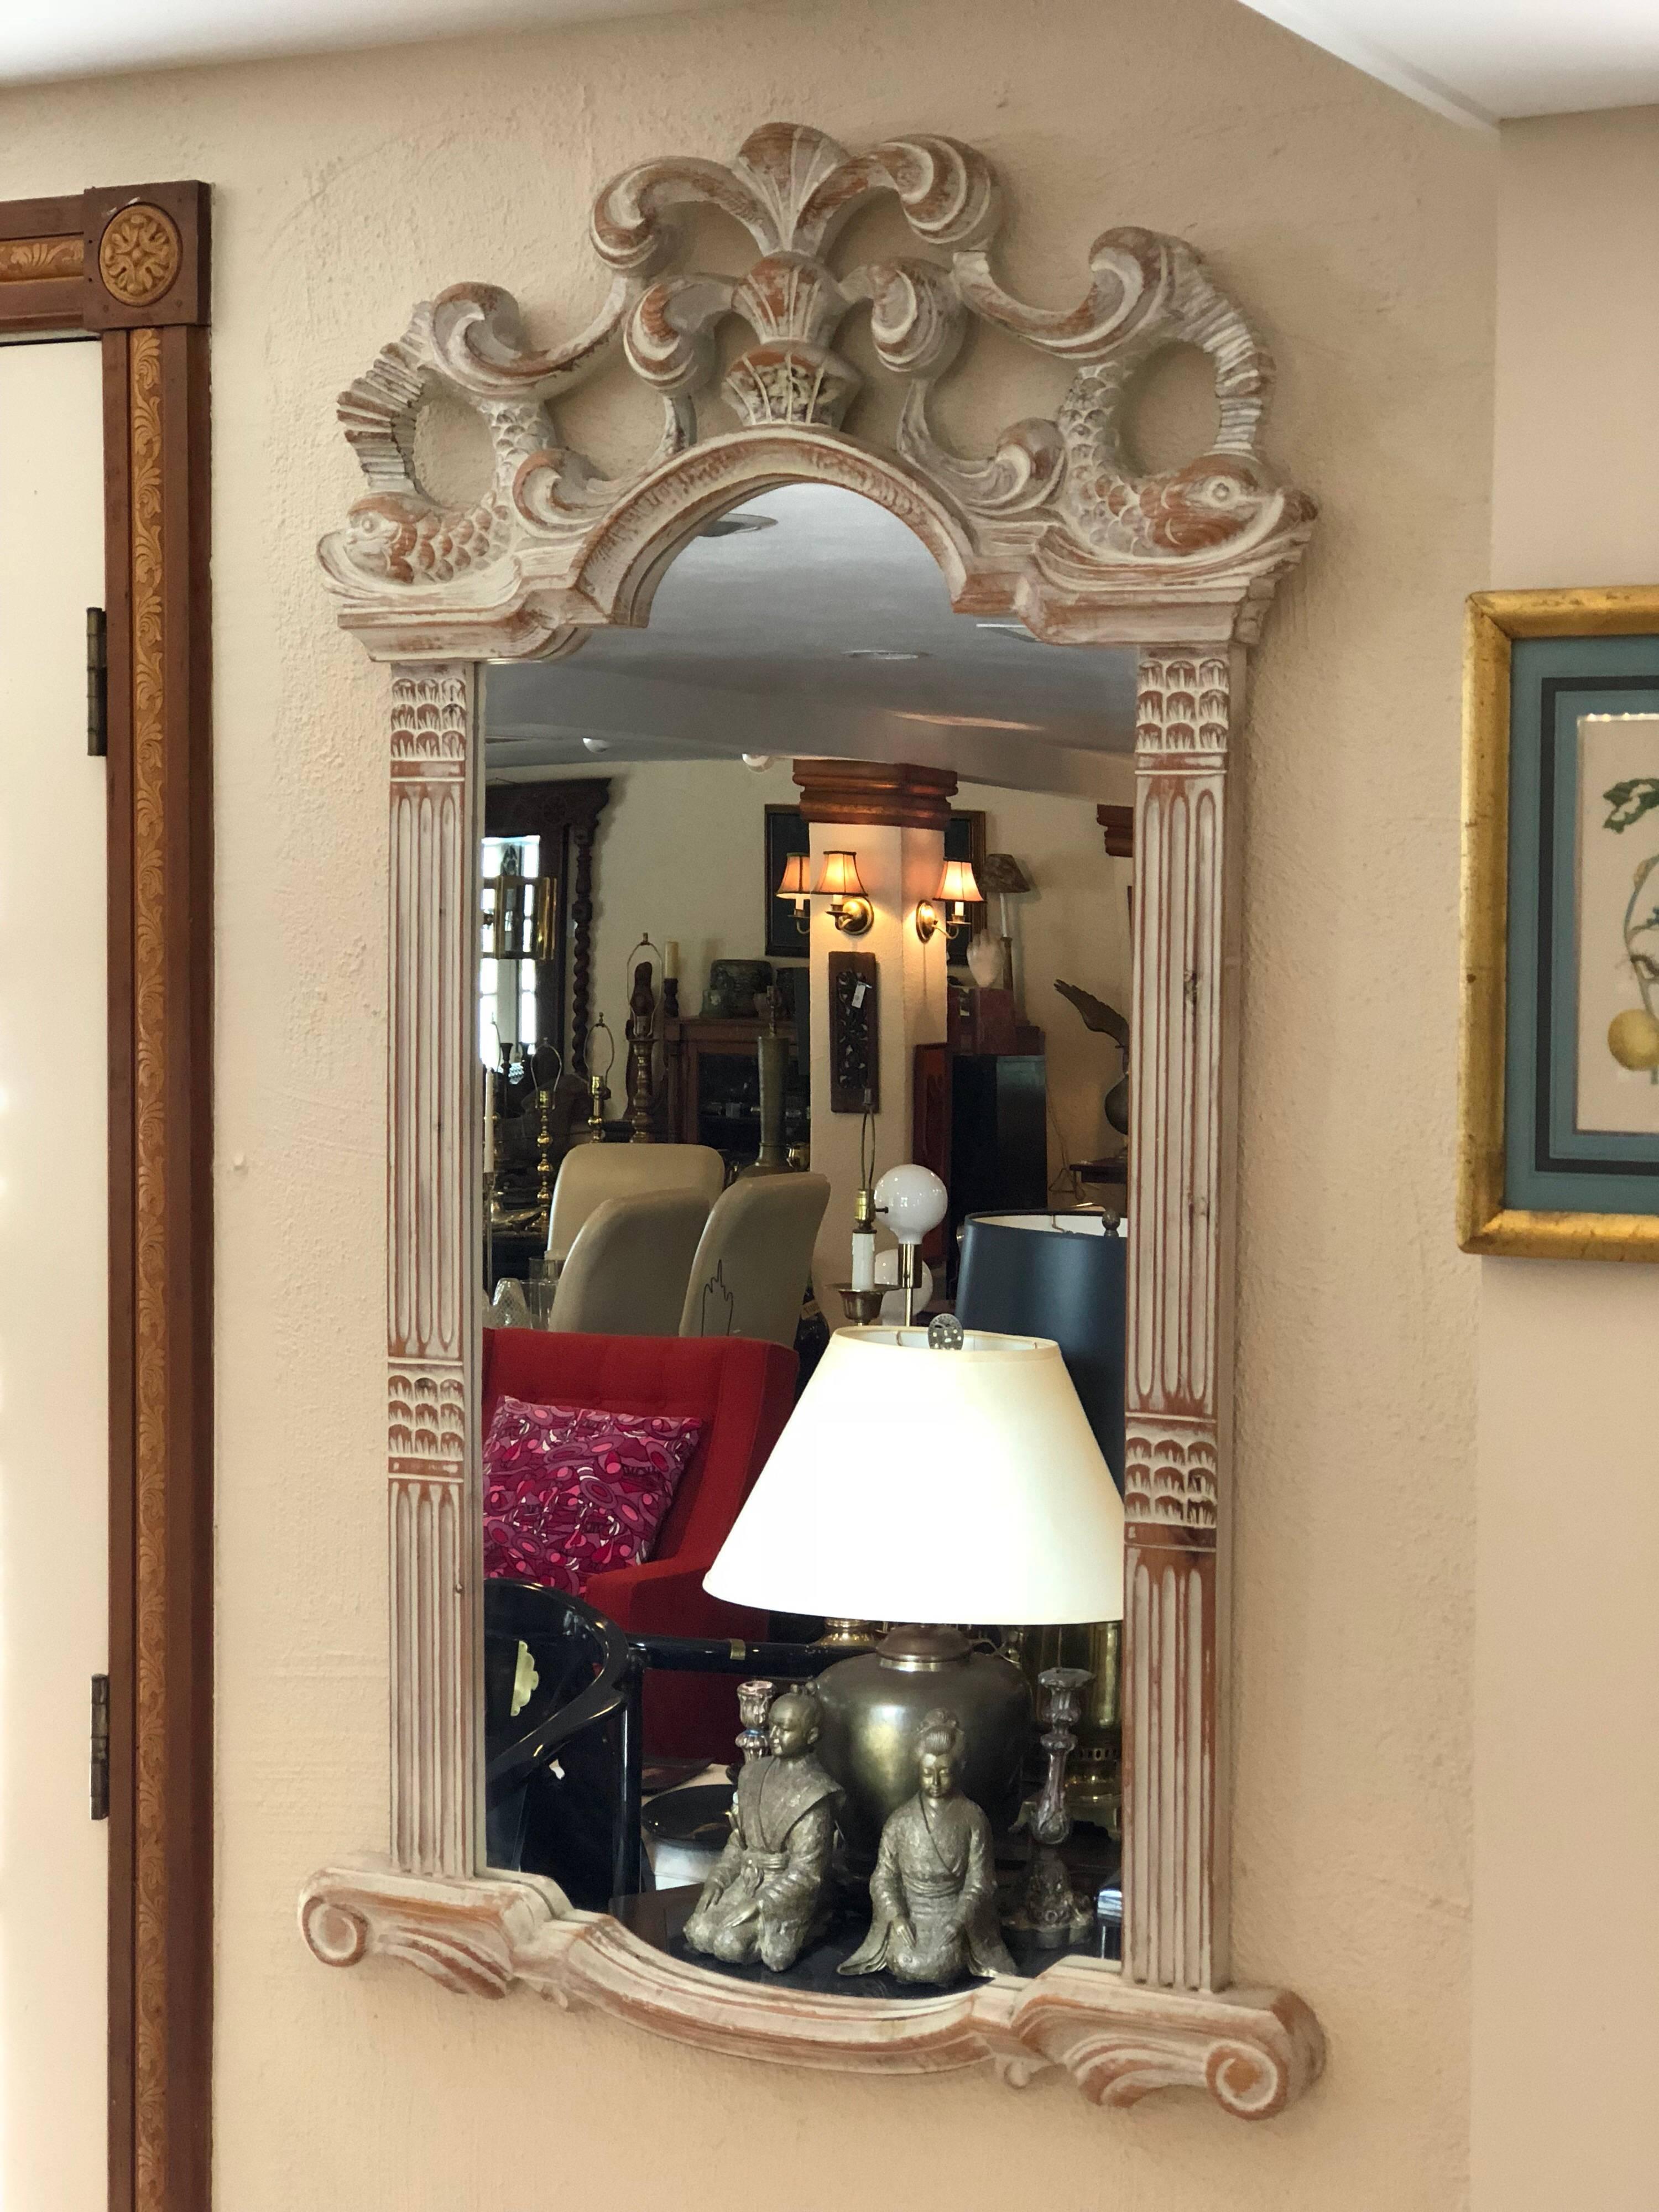 Carved white-washed wooden mirror from Spain. Beautiful details of carved wooden dolphins make up this mirror. This unique and unusual mirror would look great in an entry way, bathroom or above a small chest of drawers or an upright bar cart. This